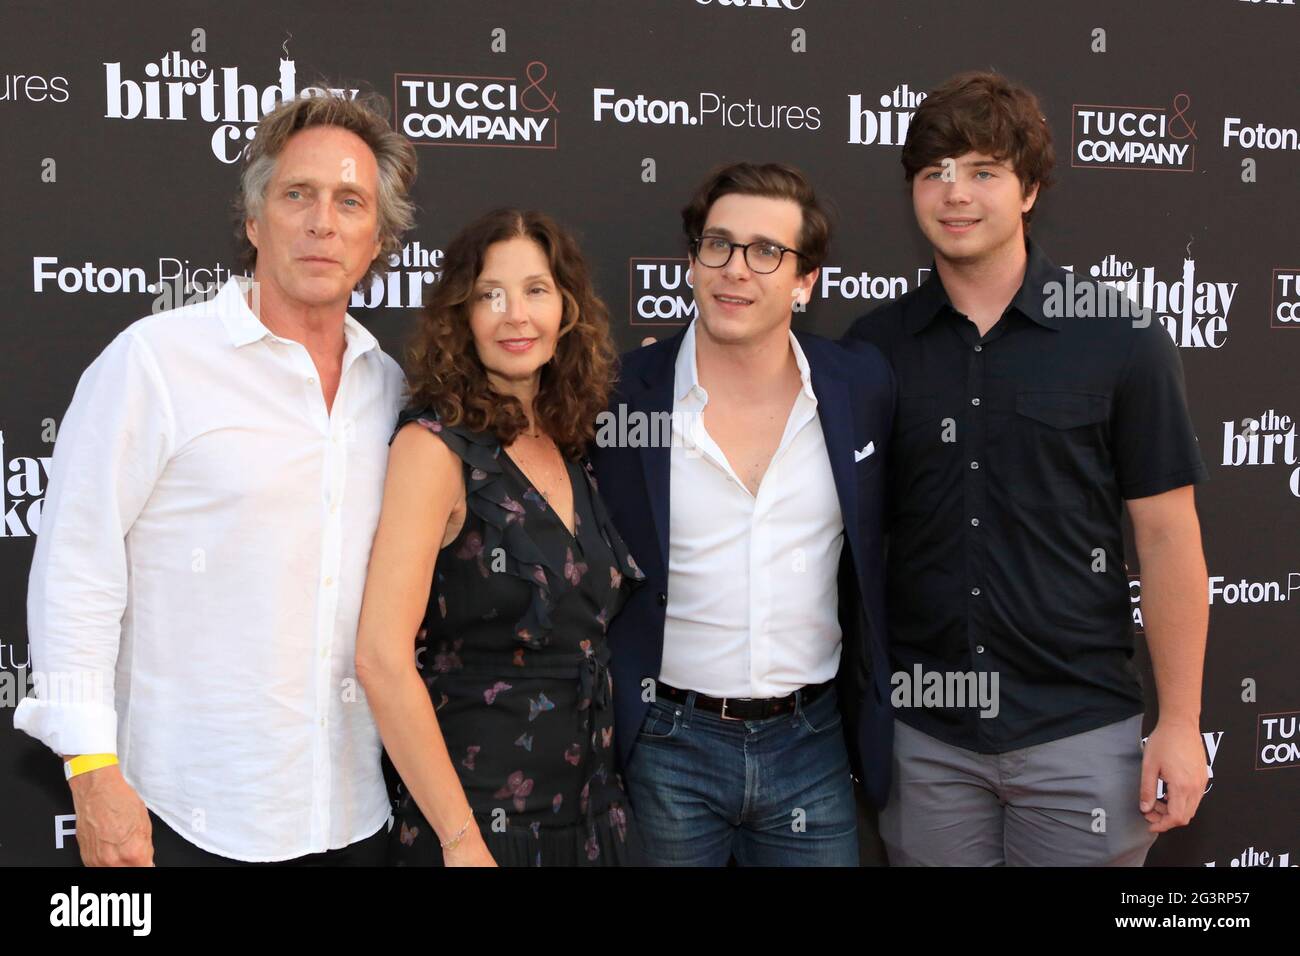 Beverly Hills, USA. 16th June, 2021. LOS ANGELES - MAR 24: William Fichtner, Kymberly Kalil, Sam Fichtner, Van Fichtner at The Birthday Cake LA Premiere at the Fine Arts Theater on March 24, 2021 in Beverly Hills, CA (Photo by Katrina Jordan/Sipa USA) Credit: Sipa USA/Alamy Live News Stock Photo